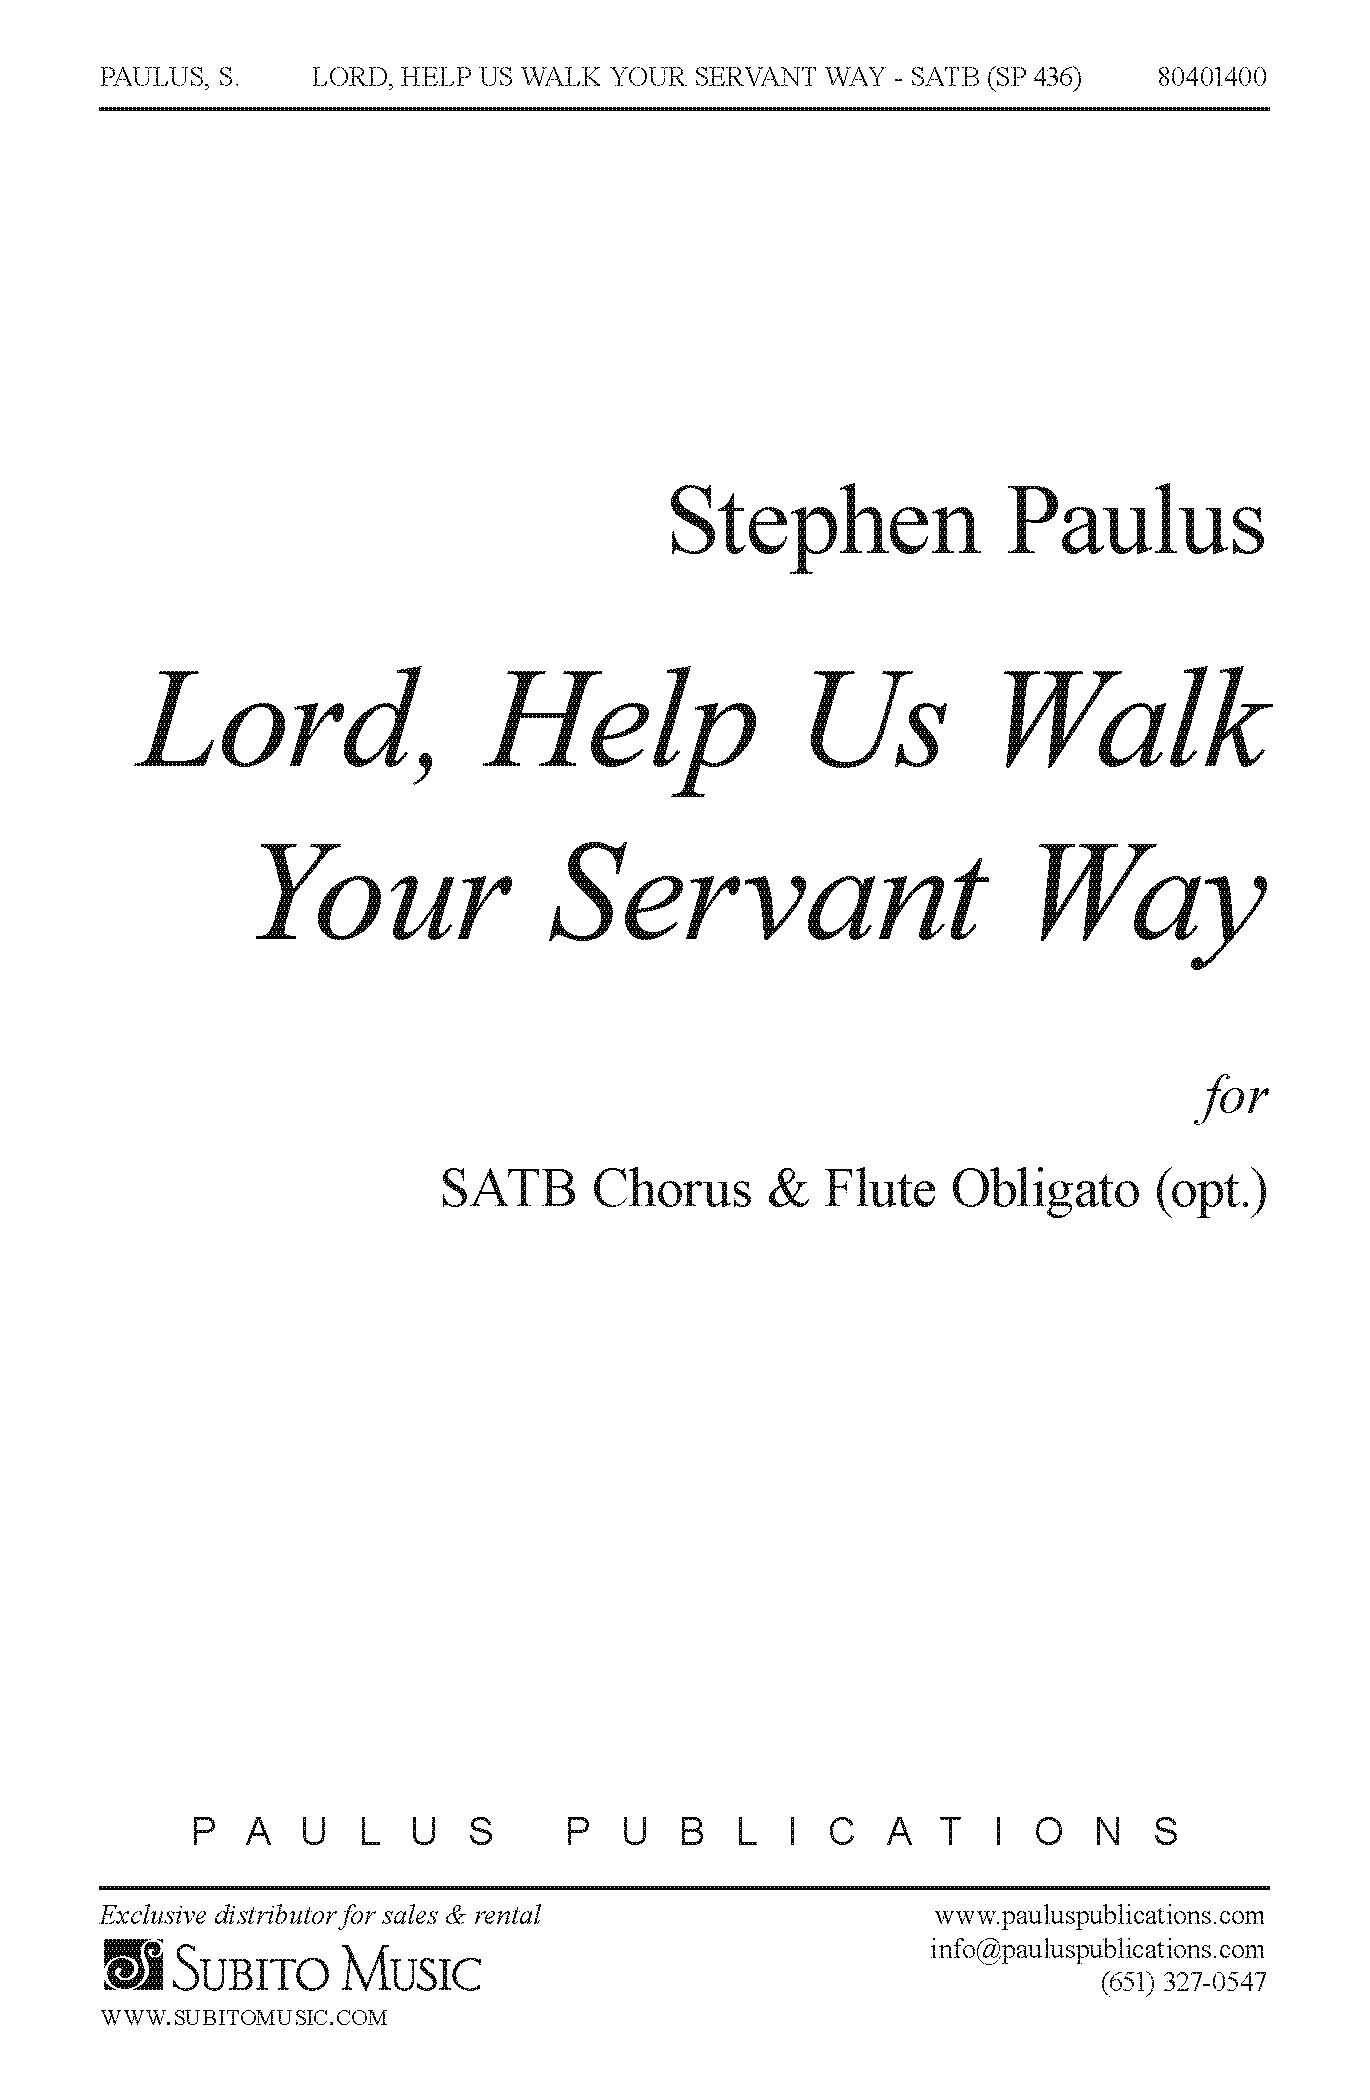 Lord, Help Us Walk Your Servant Way for SATB Chorus, opt. Flute